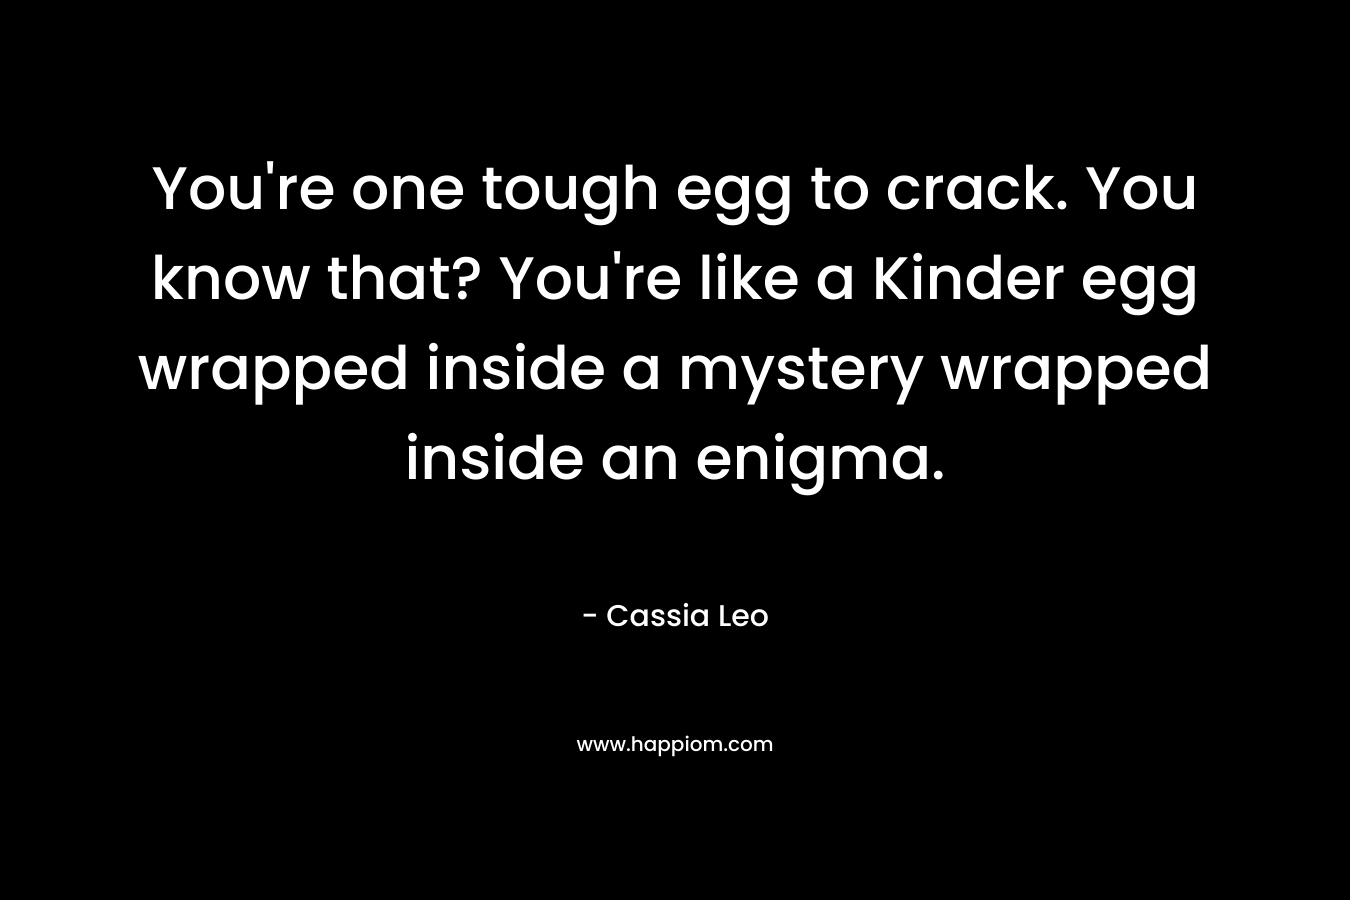 You're one tough egg to crack. You know that? You're like a Kinder egg wrapped inside a mystery wrapped inside an enigma.